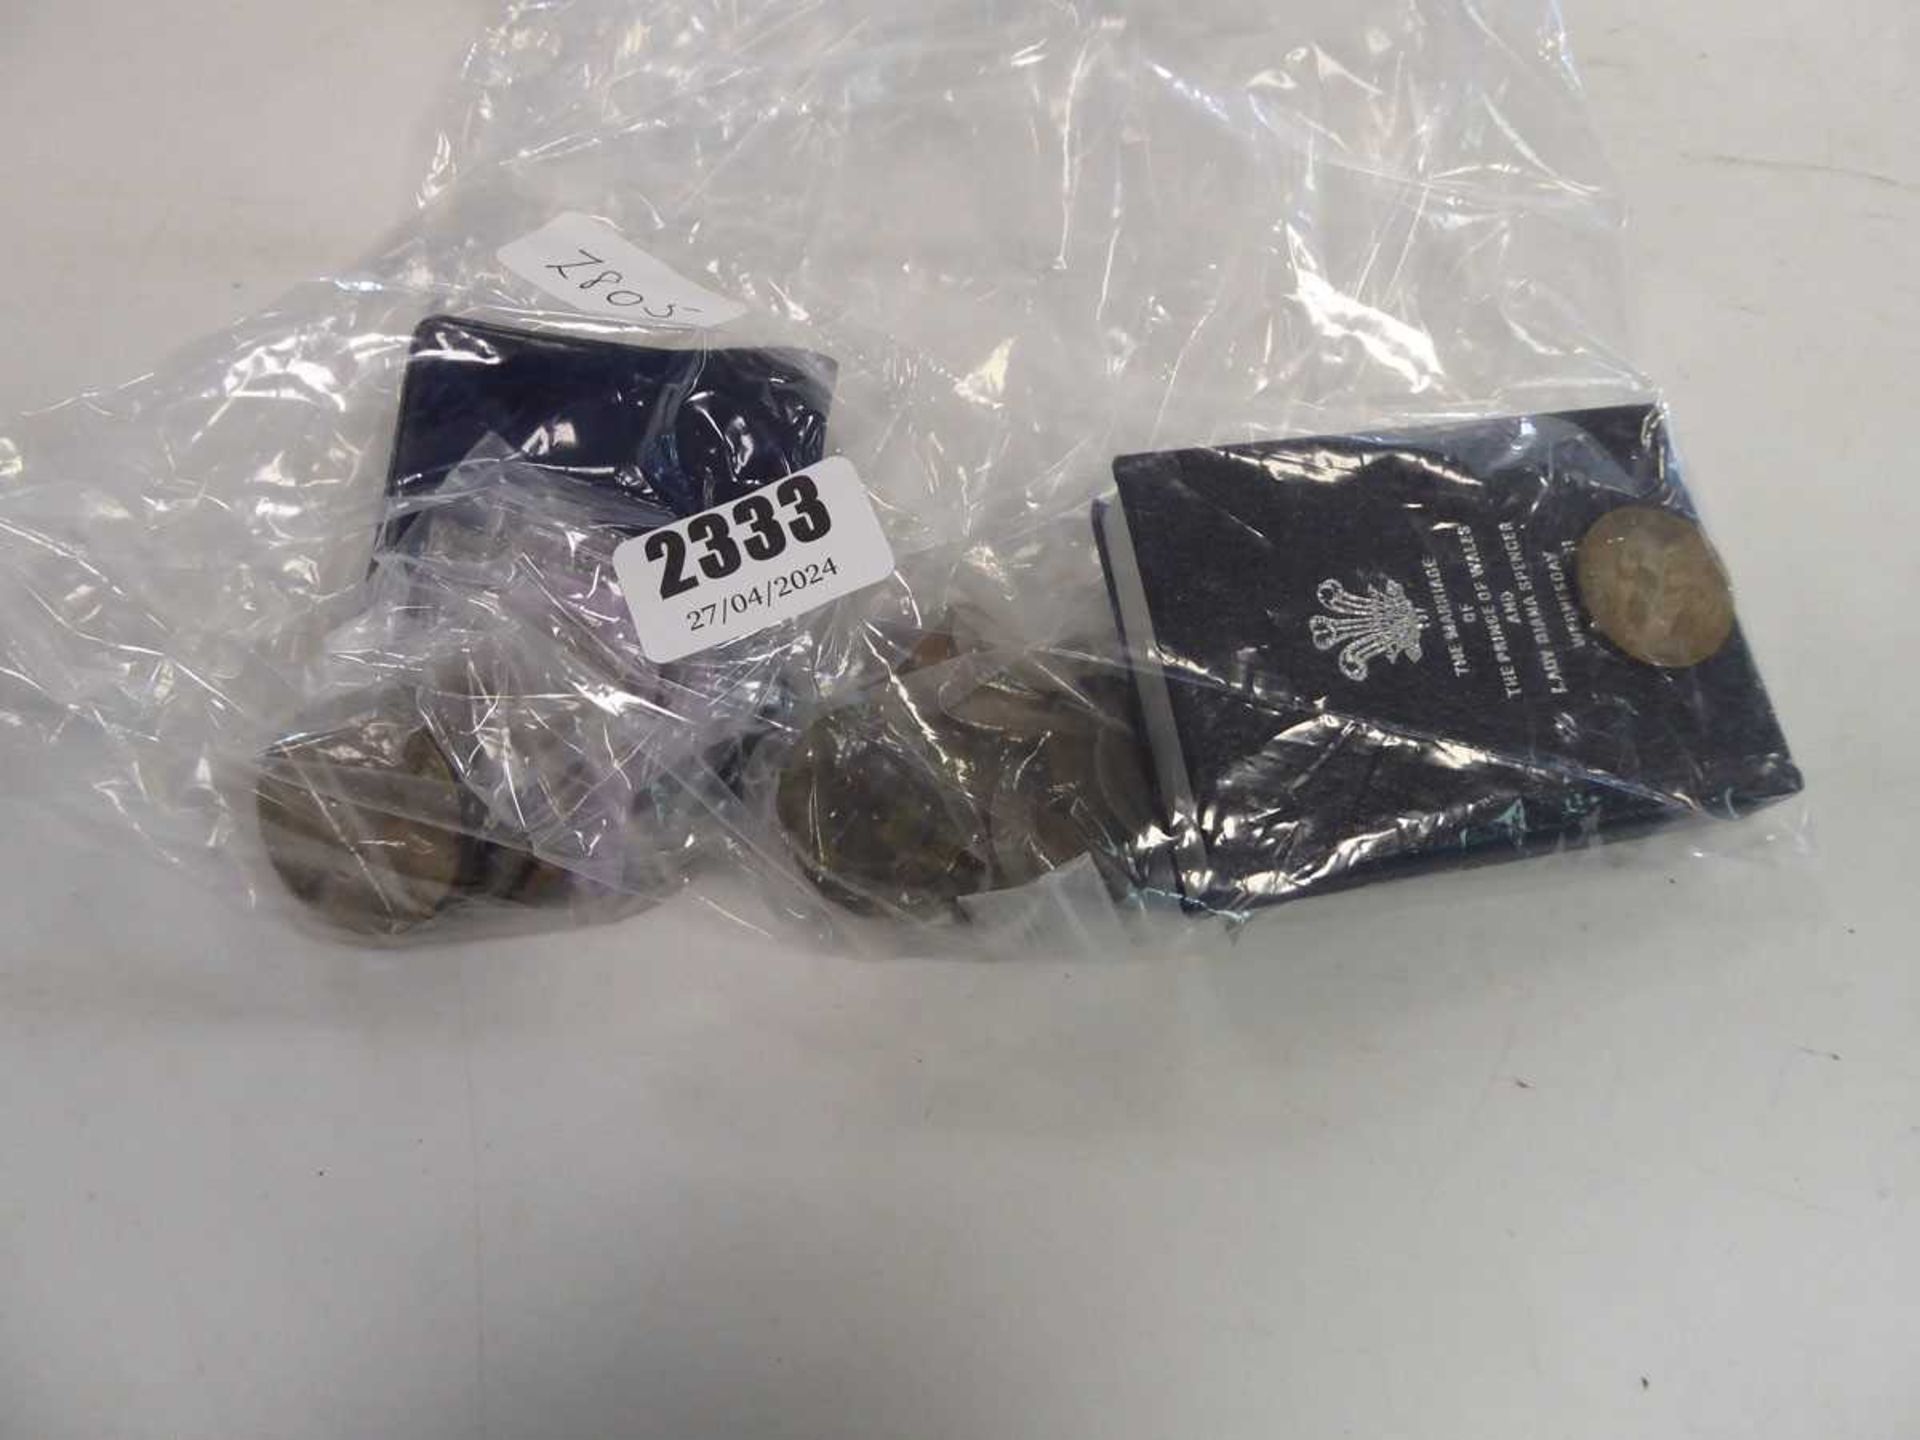 Bag containing various coins